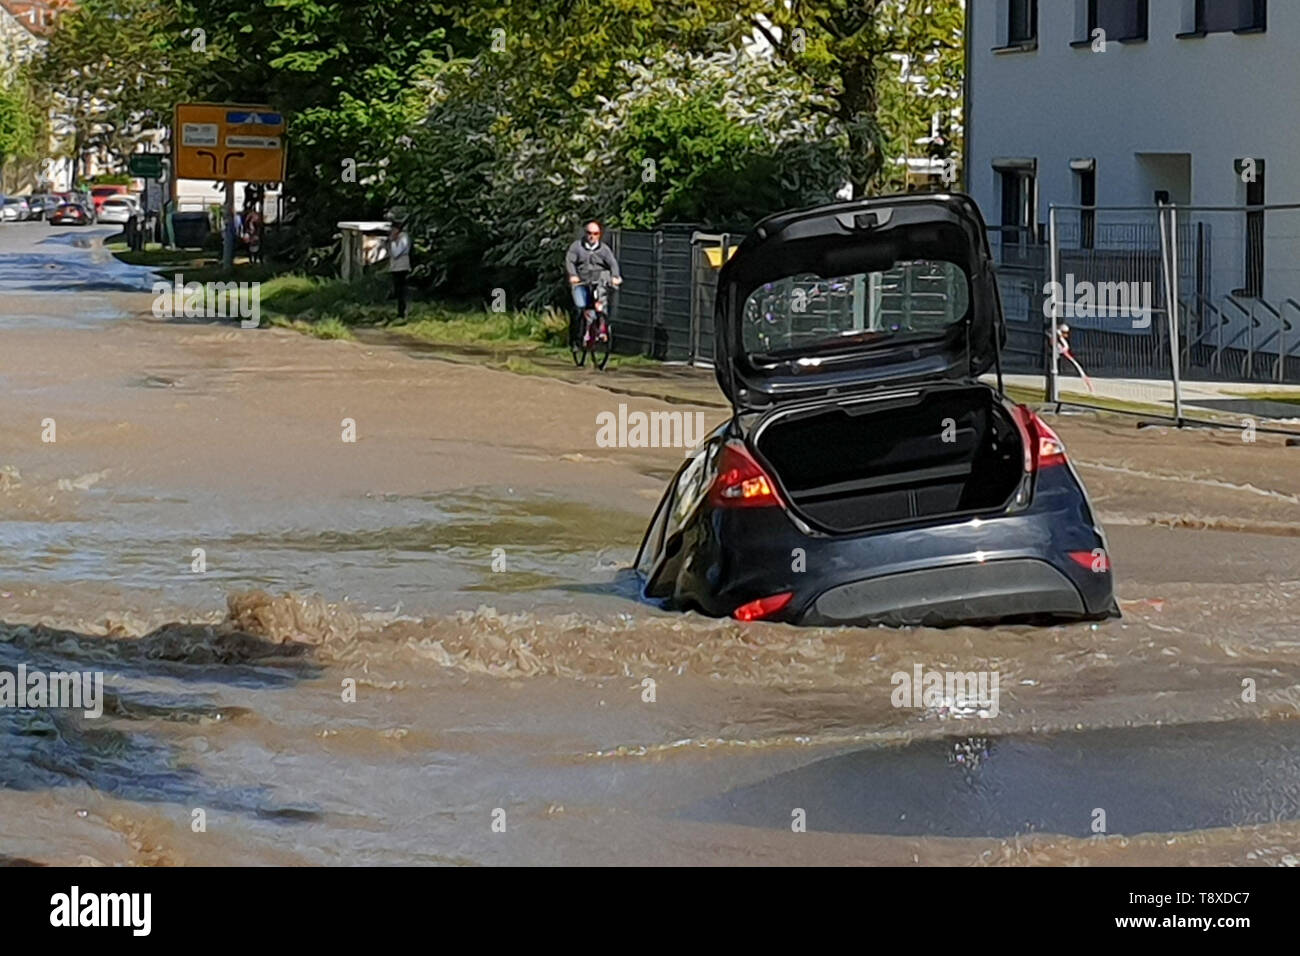 https://c8.alamy.com/comp/T8XDC7/rostock-germany-15th-may-2019-a-car-is-stuck-in-a-hole-in-a-road-after-a-burst-water-pipe-due-to-a-burst-water-pipe-on-wednesday-in-the-east-of-rostock-a-big-hole-opened-up-in-a-busy-road-according-to-the-police-the-driver-was-able-to-leave-his-vehicle-unharmed-to-dpa-water-pipe-burst-in-rostock-car-sinks-into-hole-credit-niels-draschaftdpaalamy-live-news-T8XDC7.jpg